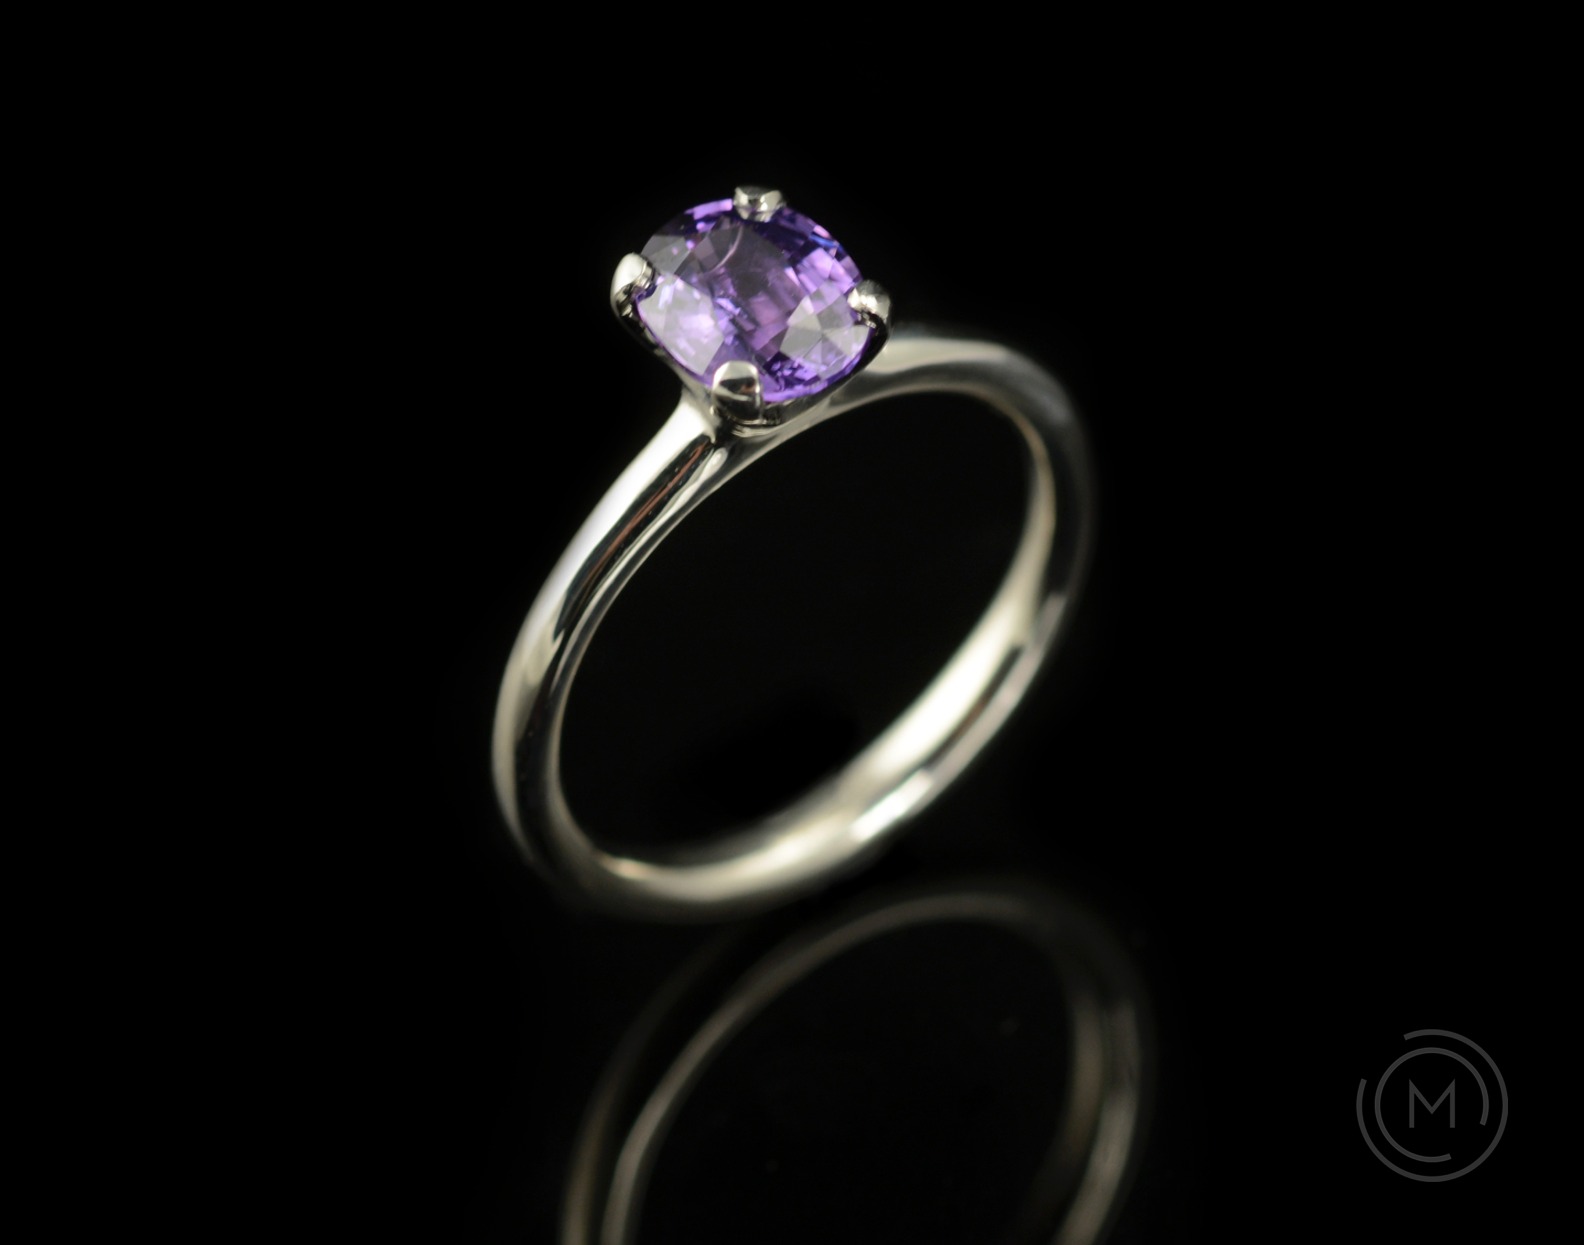 Purple sapphire 4-claw engagement ring